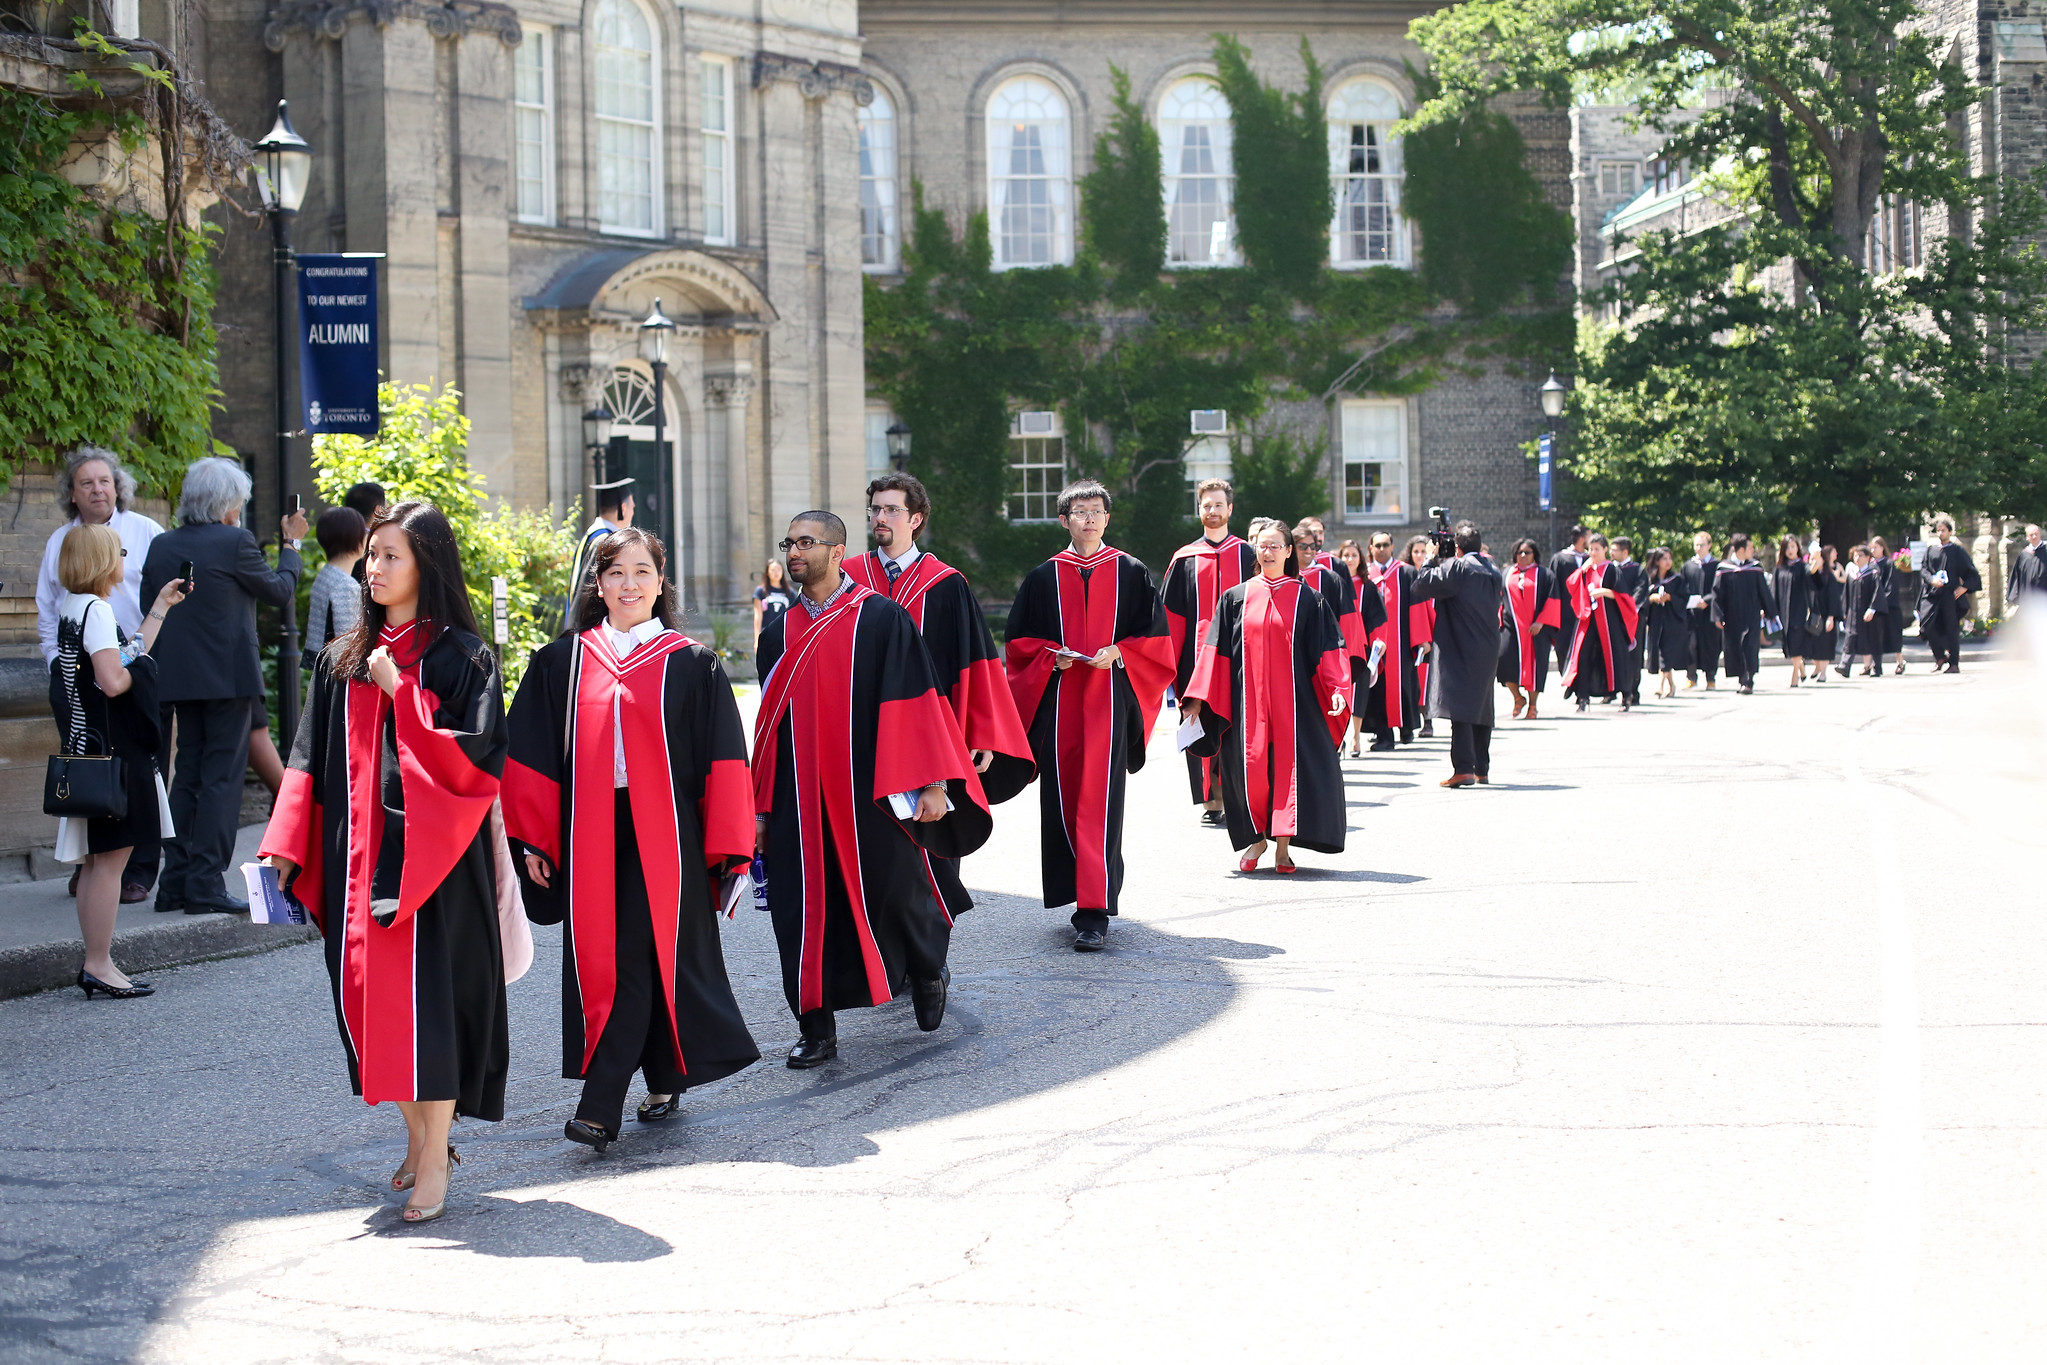 Students walking in a line during convocation.